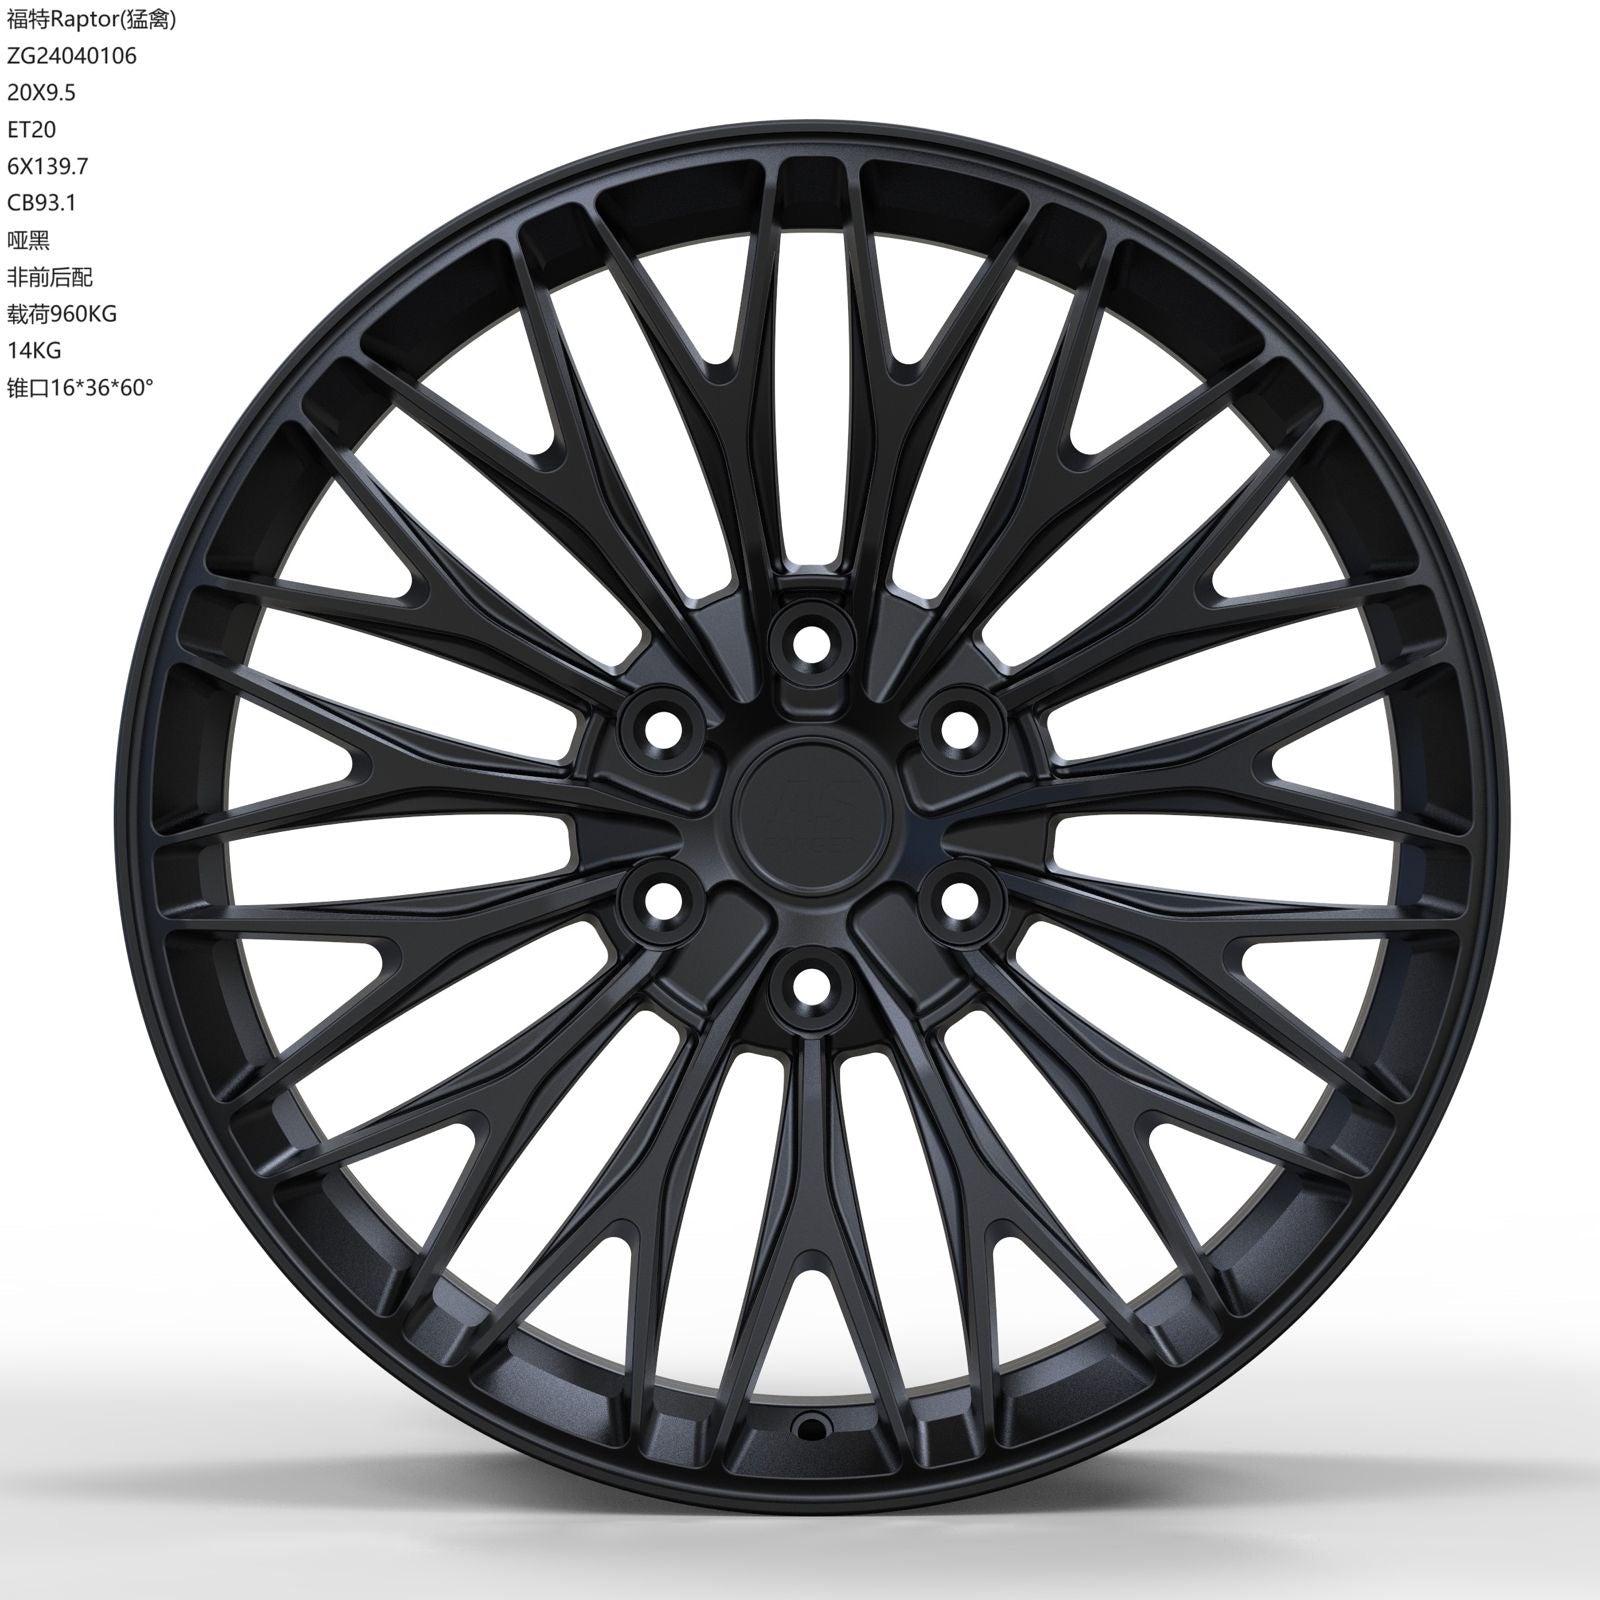 20” AS FORGED 002 BAKKIE RIMS 6/139 PCD